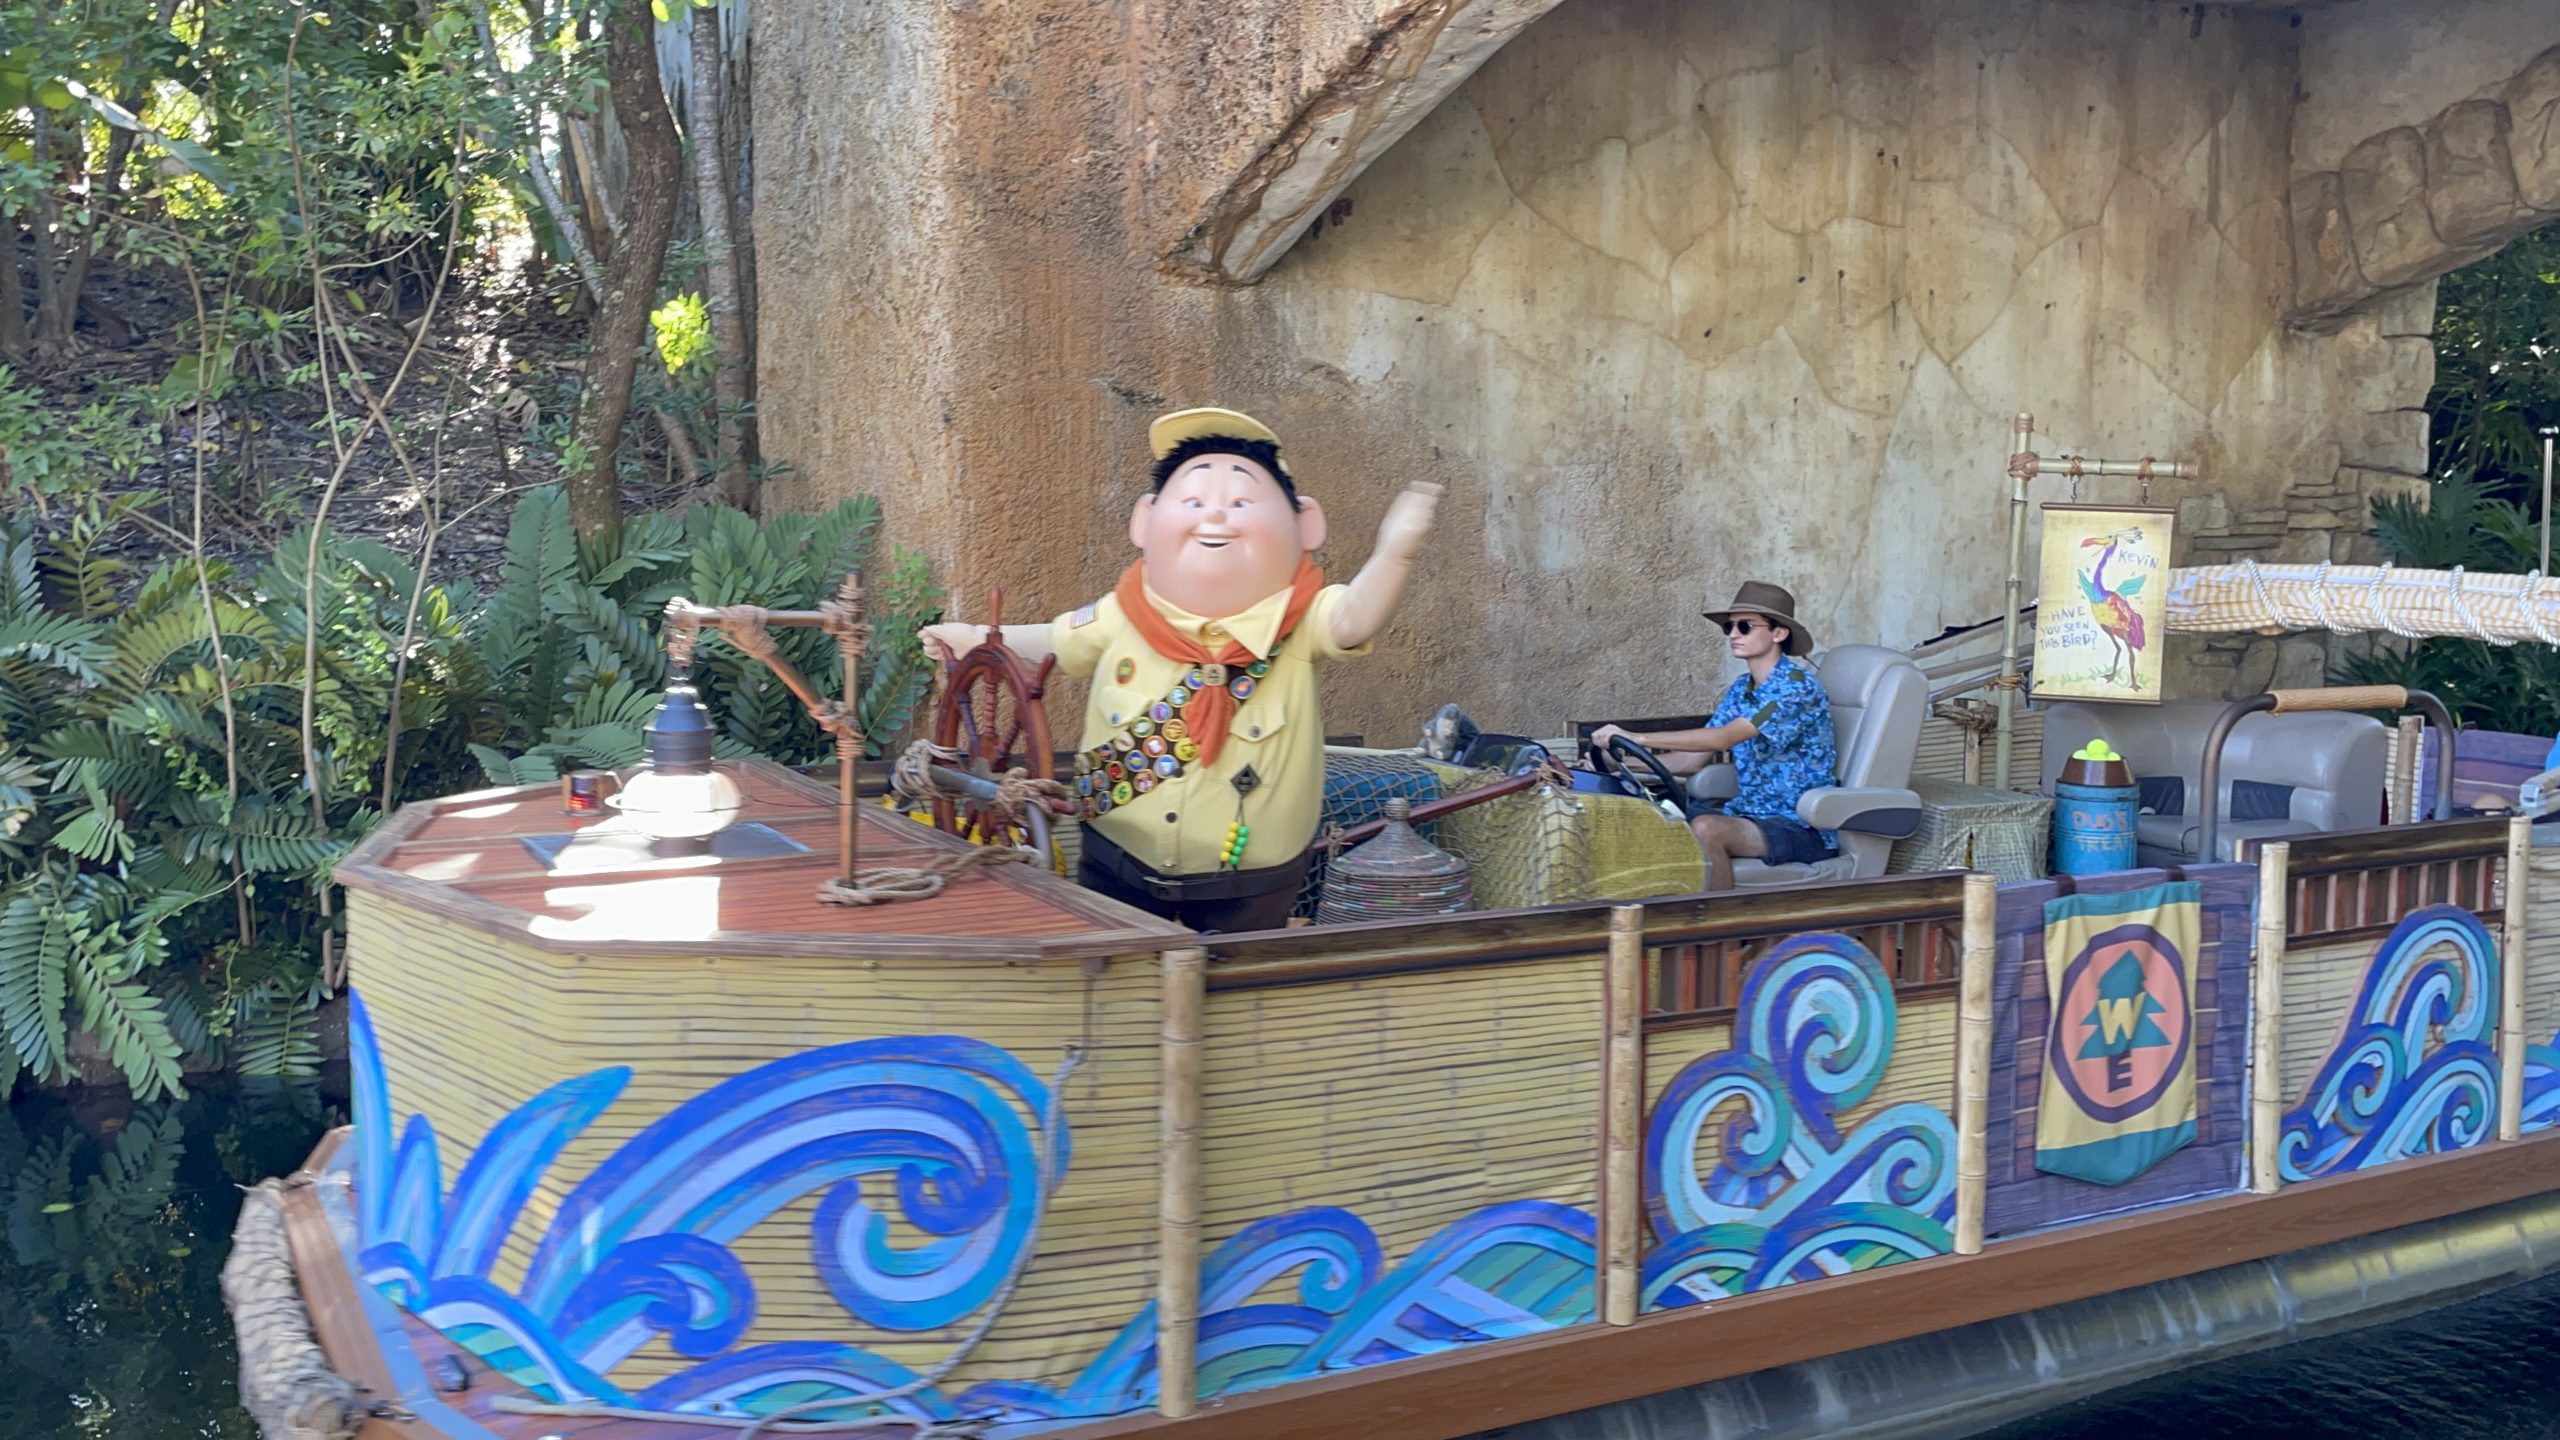 Russel from Up on a new flotilla